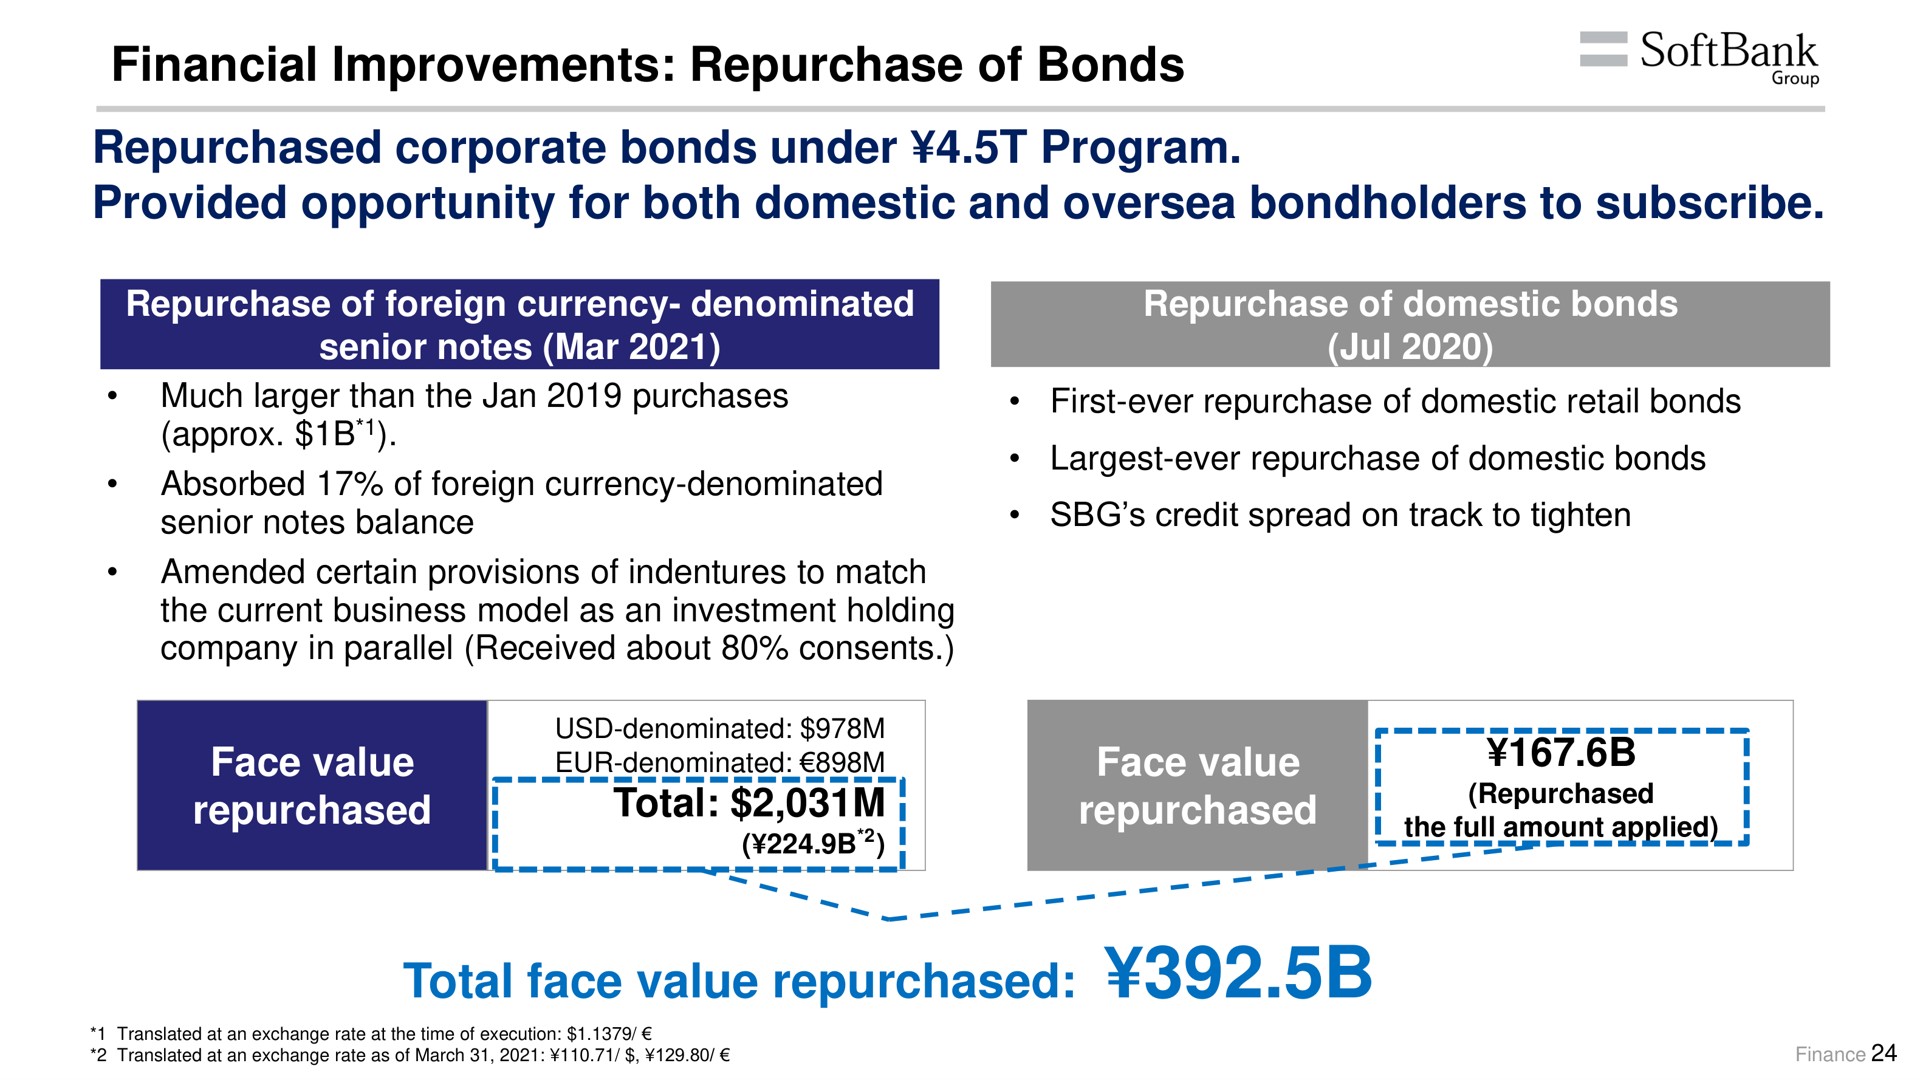 financial improvements repurchase of bonds repurchased corporate bonds under program provided opportunity for both domestic and oversea bondholders to subscribe face value repurchased total face value repurchased total face value repurchased group denominated a | SoftBank